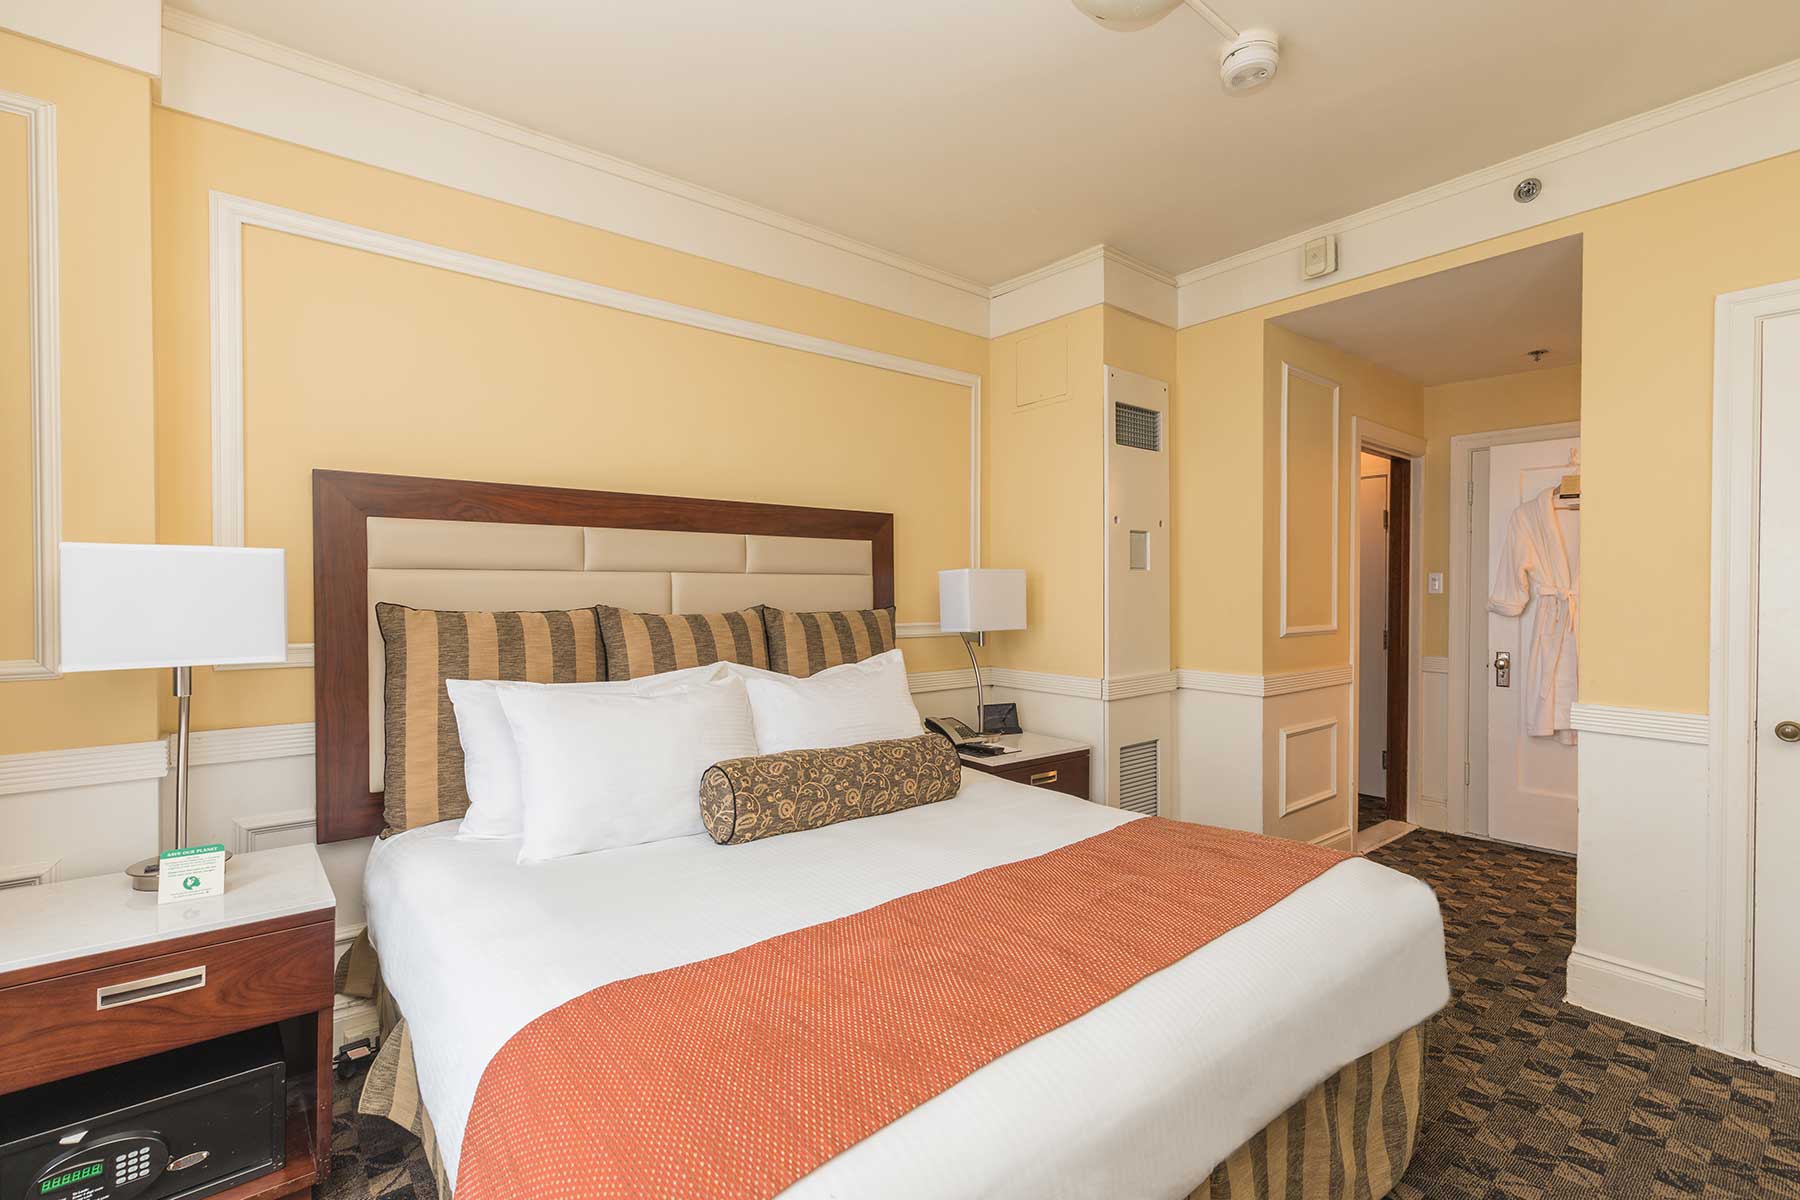 Pickwick-Hotel-Suite-Room-King-Bed-with-Bathroom